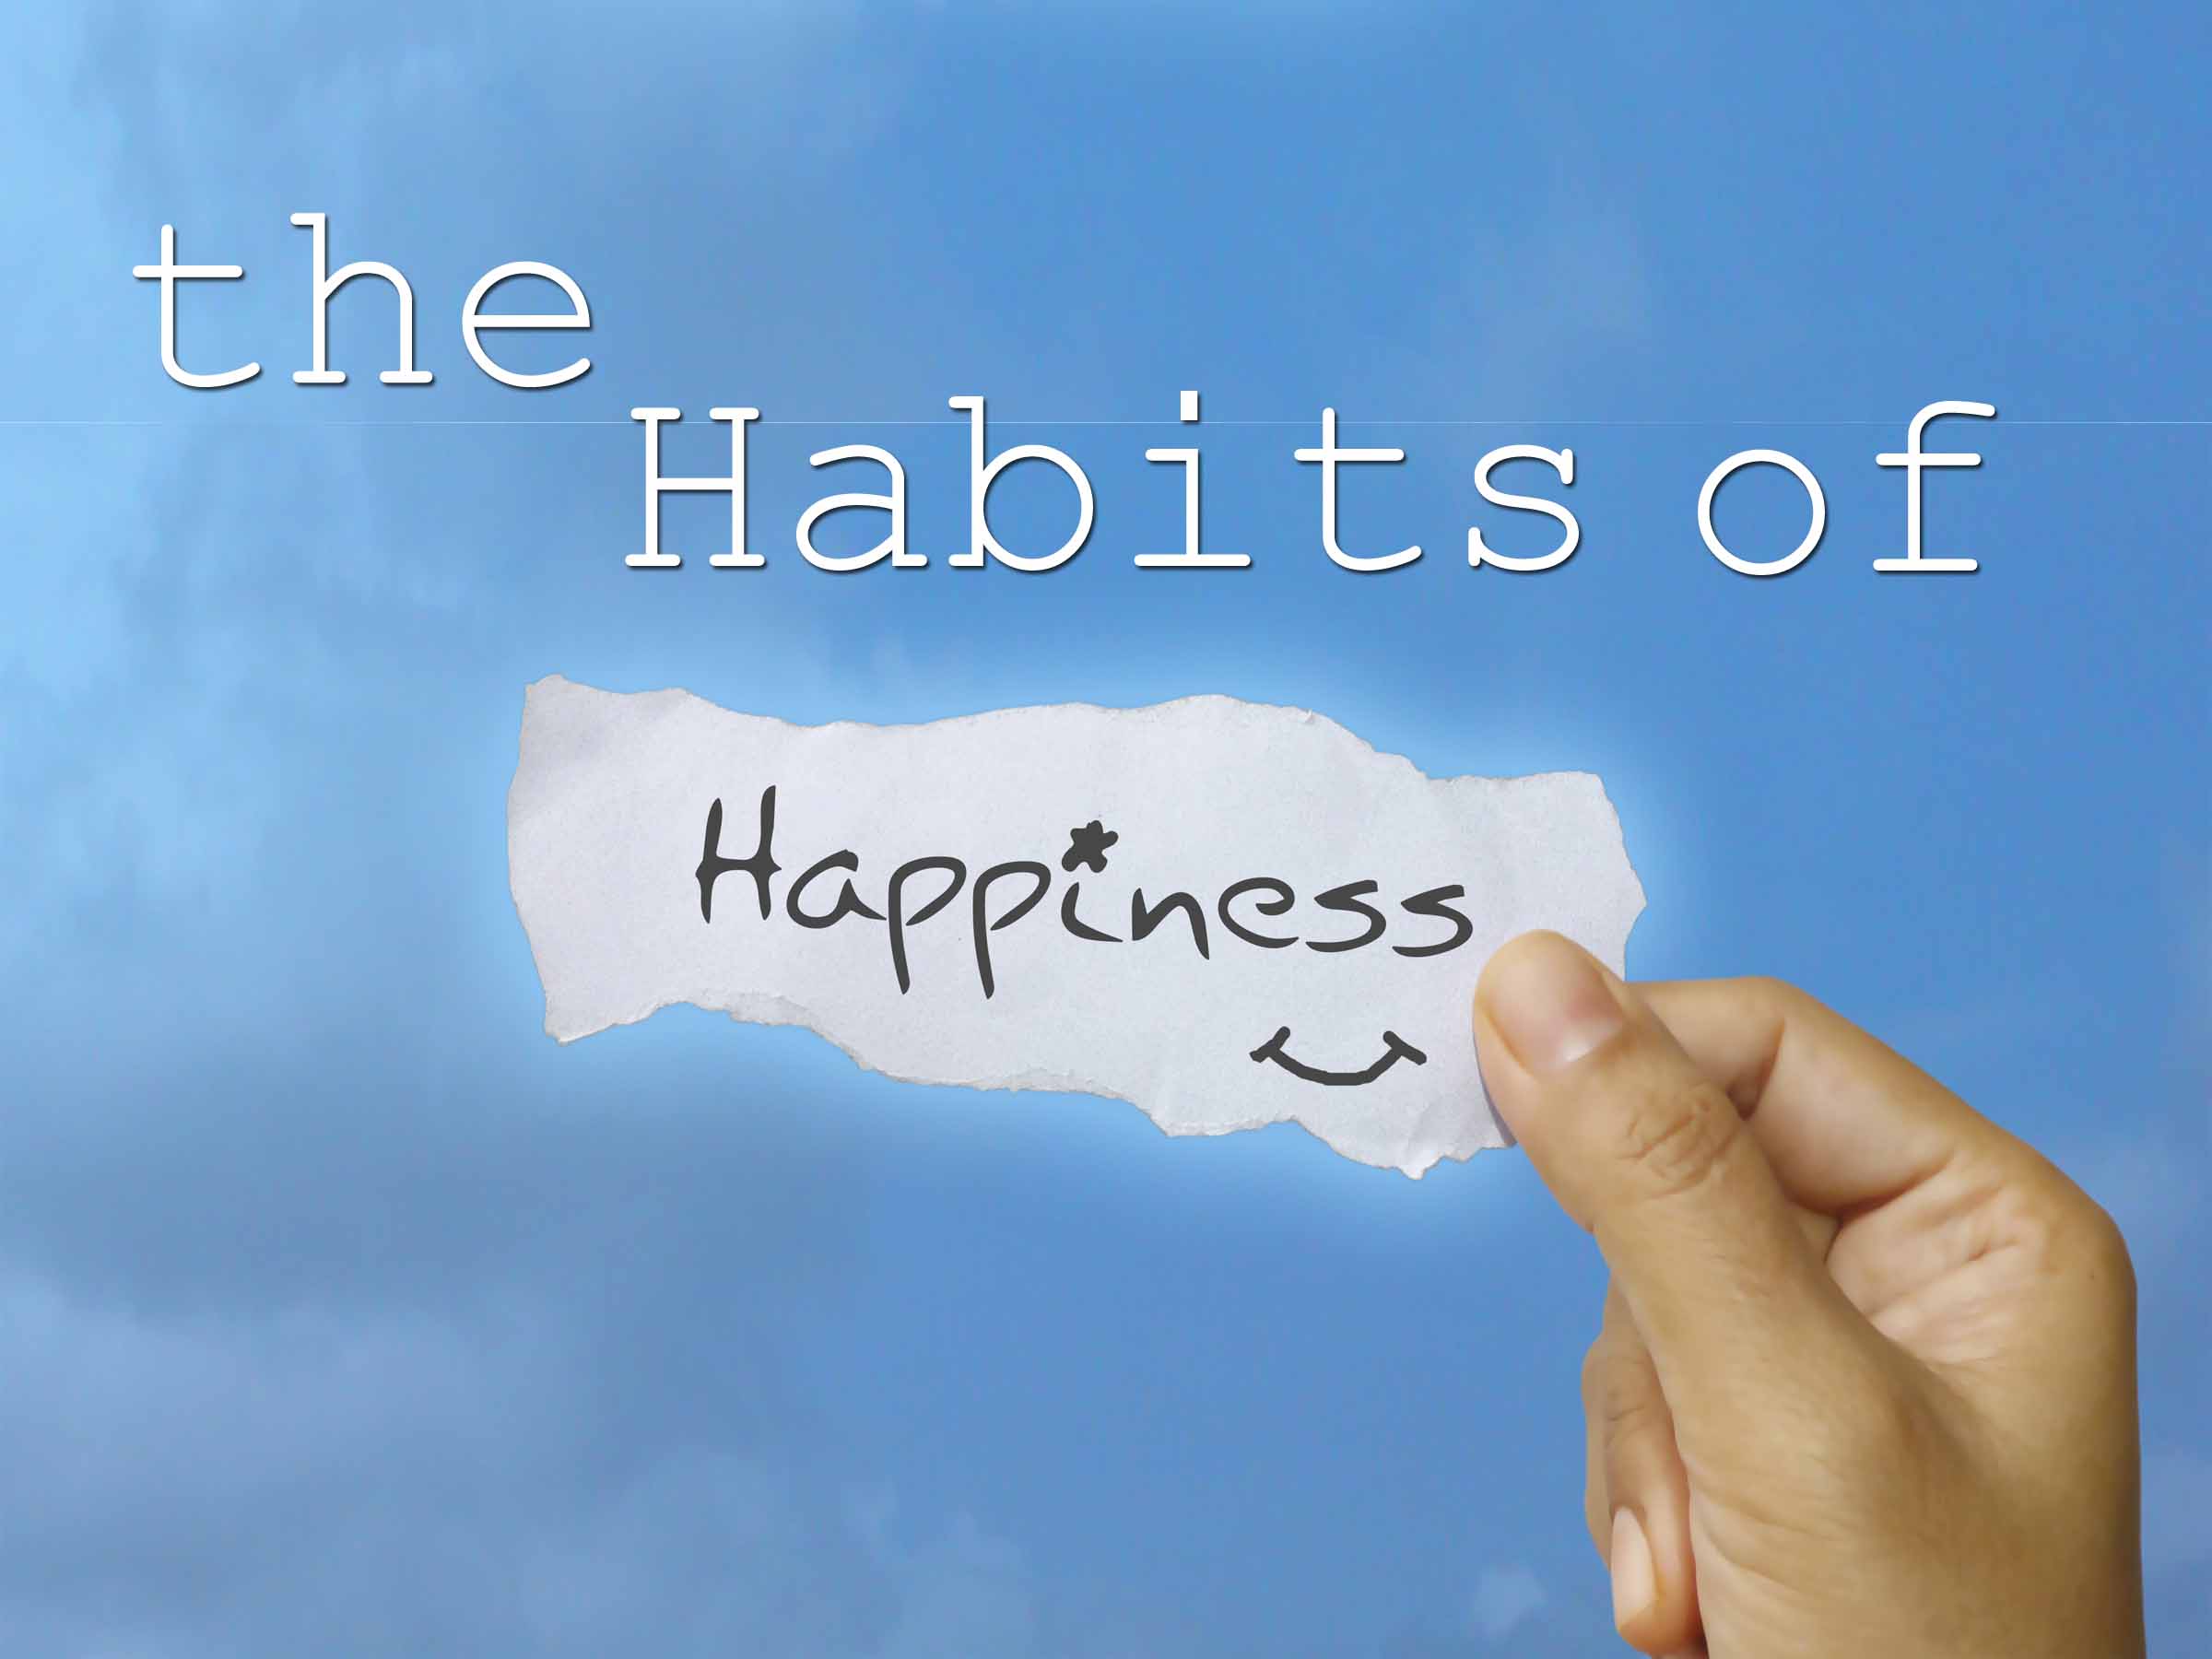 02-01-15 The Habits of Happiness - Part 5